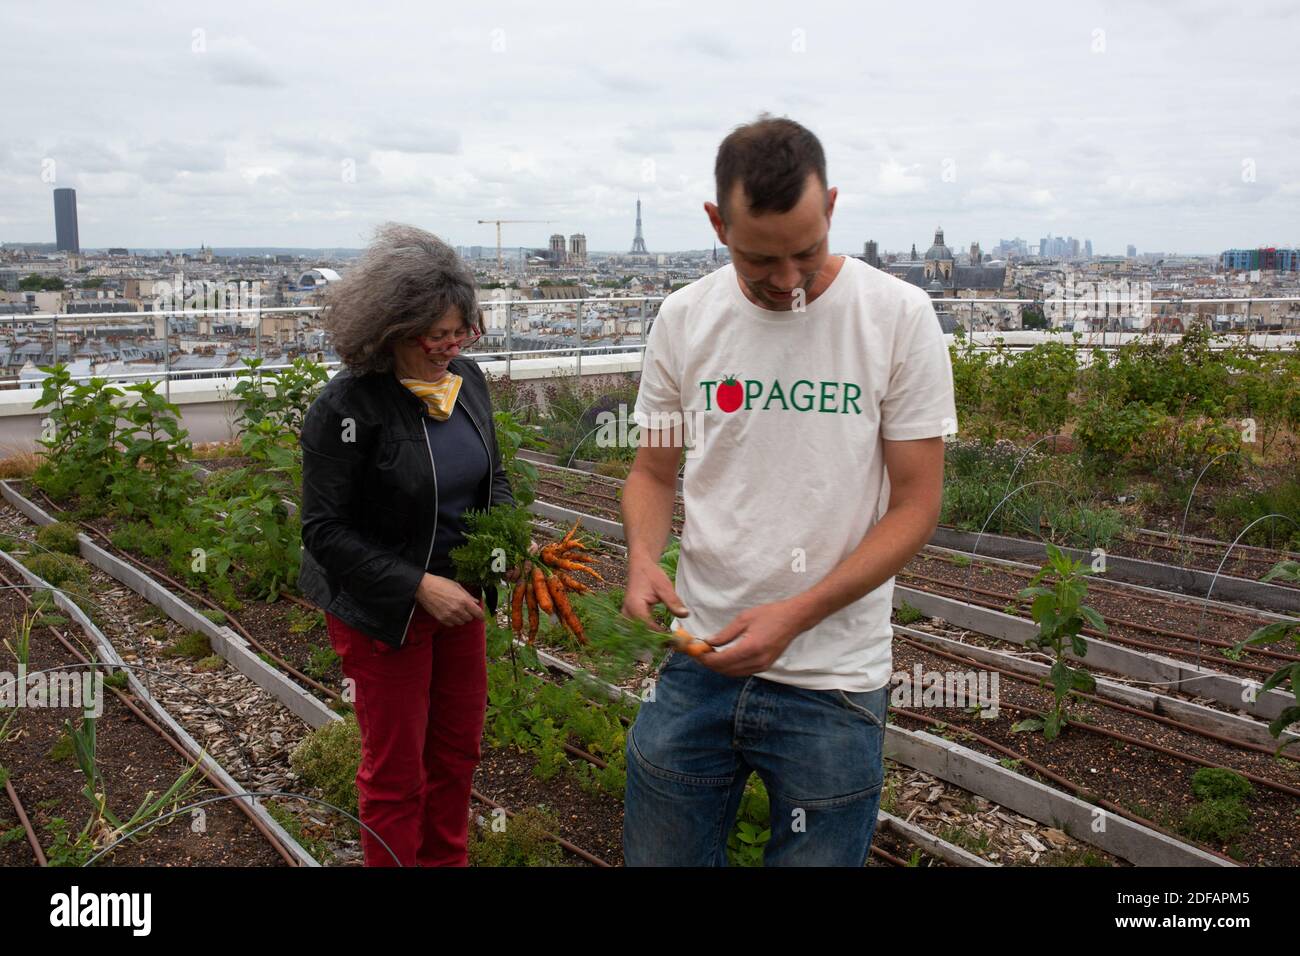 Staff of the company Topager works to harvest fruits and vegetables on the shared gardens on the roof of the Opera Bastille, where the roofs of Paris are visible. The team is composed of gardener and landscaper. On June 9, 2020 in Paris, France. Photo by Raphael Lafargue/ABACAPRESS.COM Projet d’Agriculture Urbaine Opéra 4 Saisons porté par Topager sur les toits de l’Opéra Bastille Stock Photo